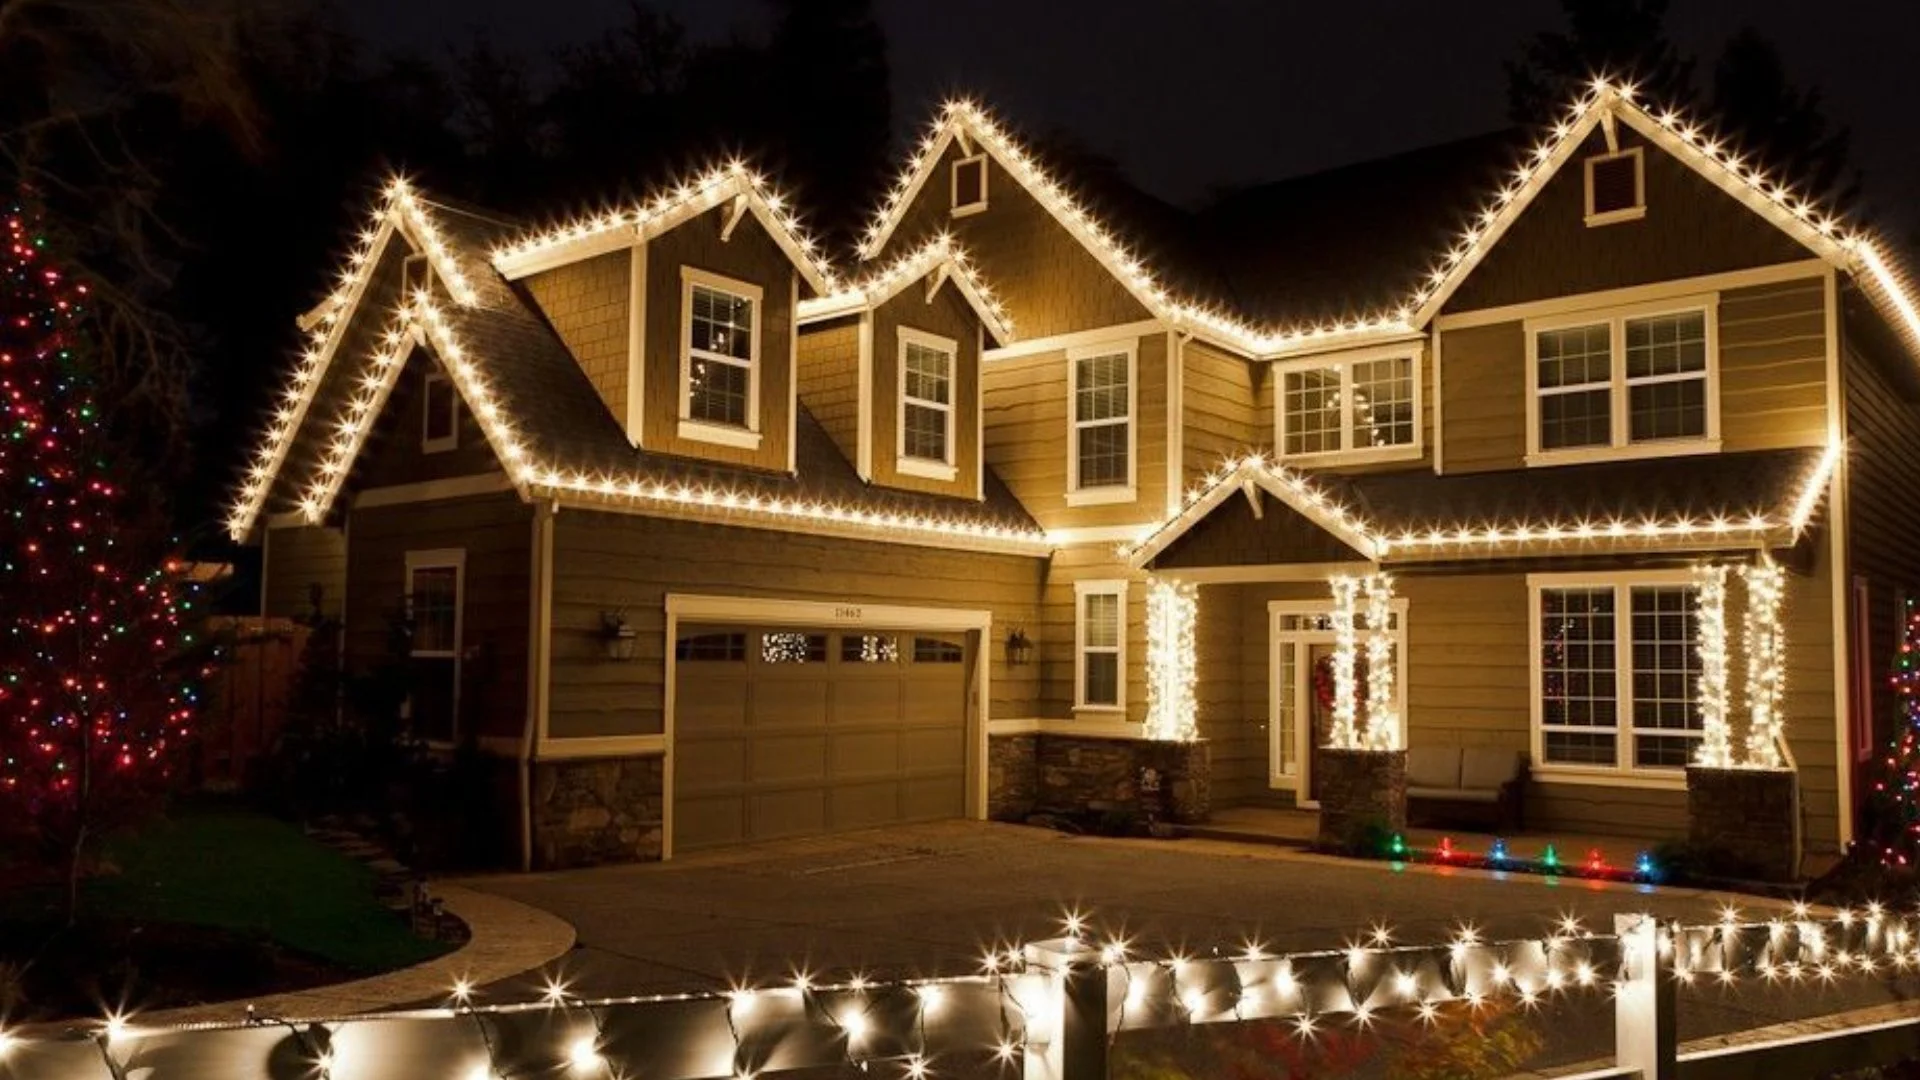 Hiring Pros to Install Your Christmas Lighting? Here’s What to Expect